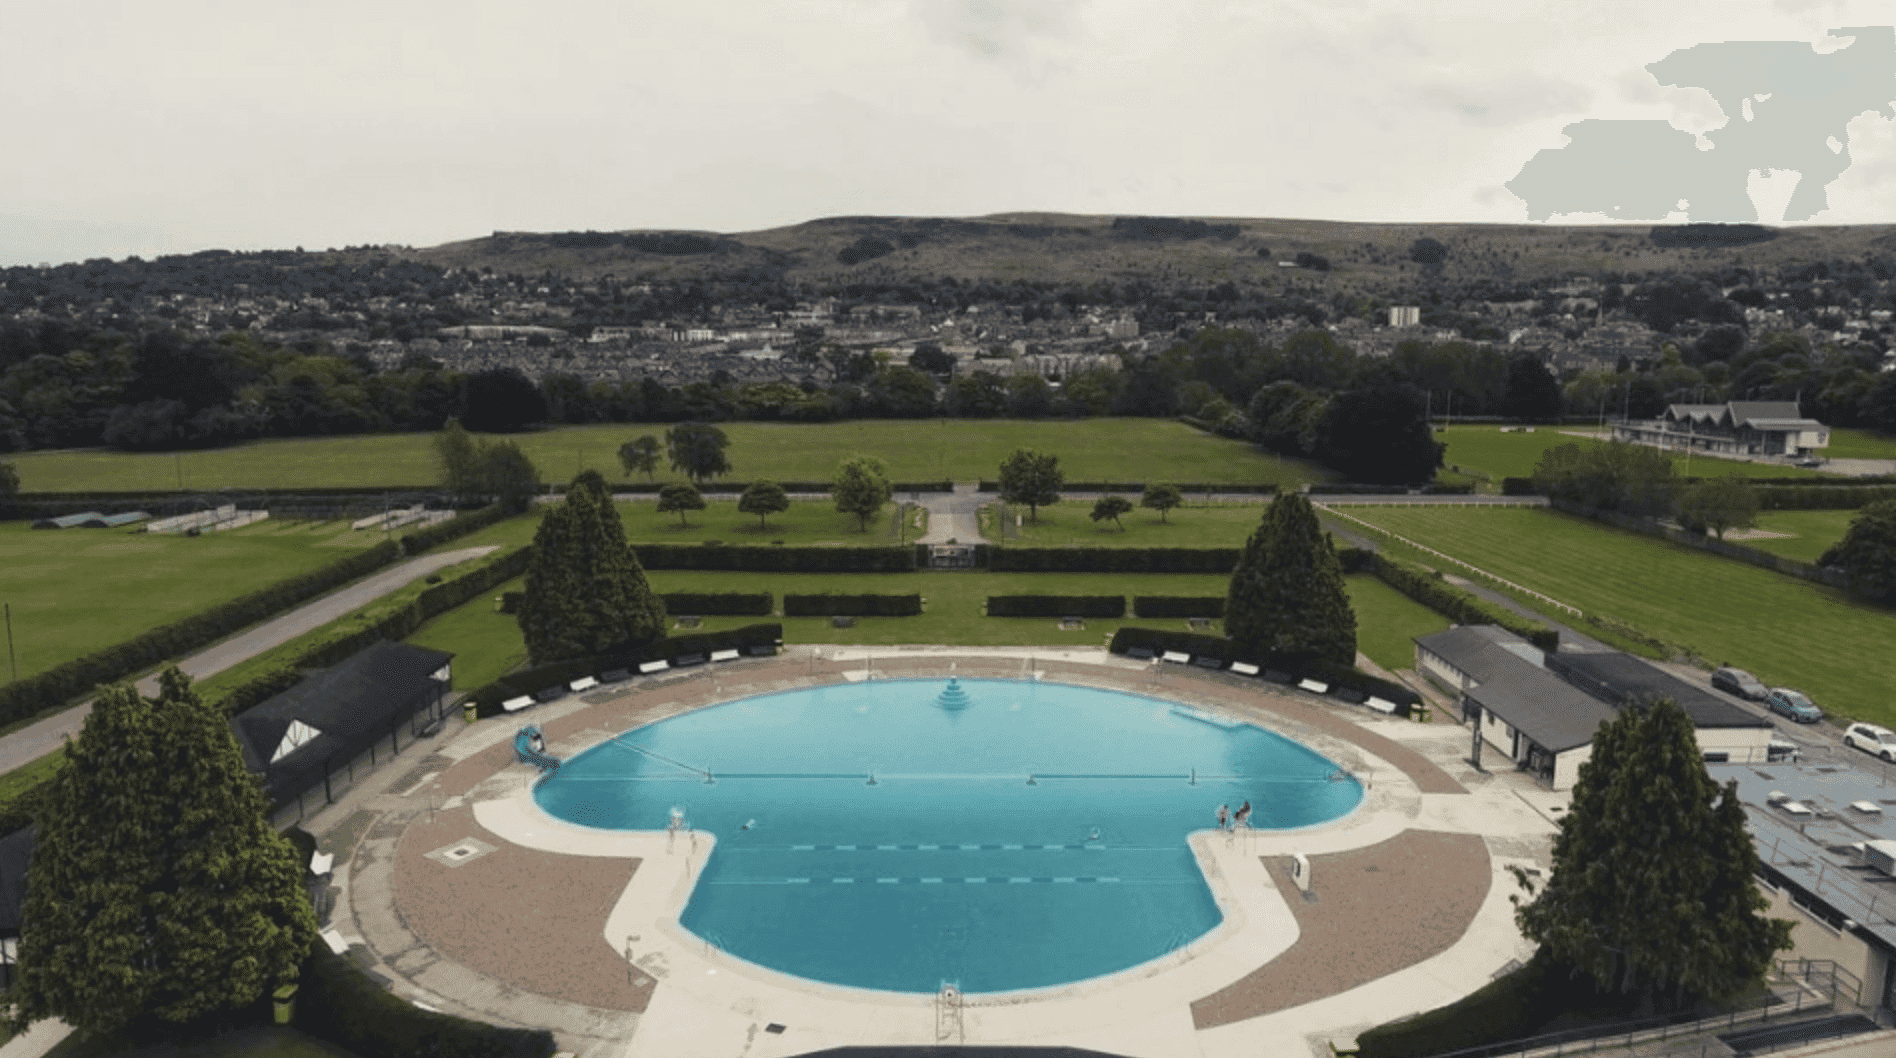 25 lidos & outdoor pools near me